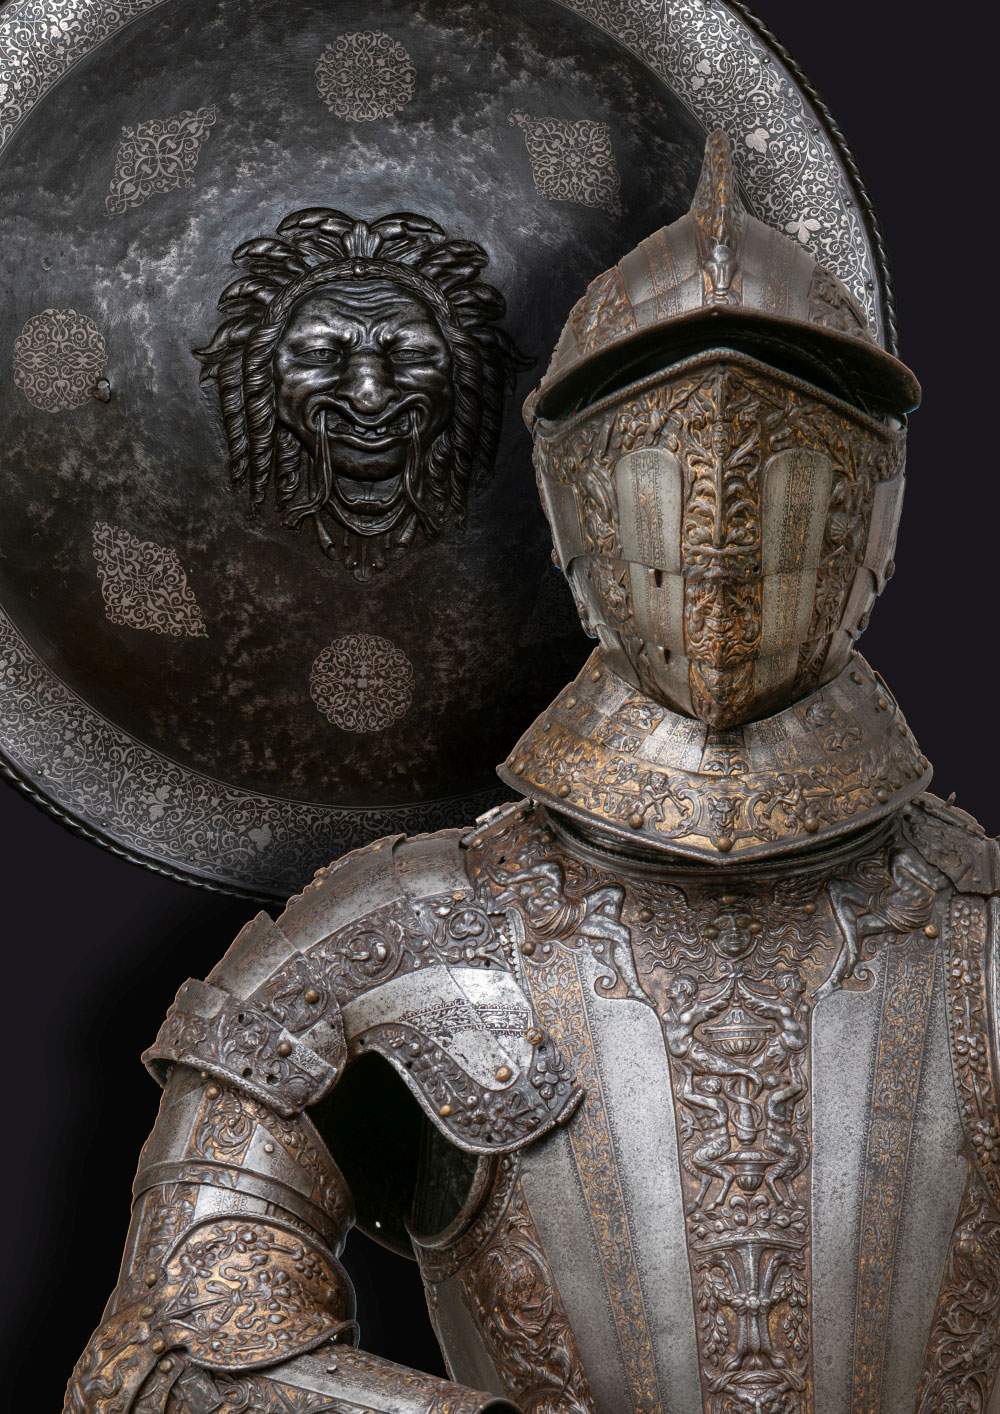 Weapons and power: an exhibition at Castel Sant'Angelo and Palazzo Venezia celebrates the world of arms in the Renaissance